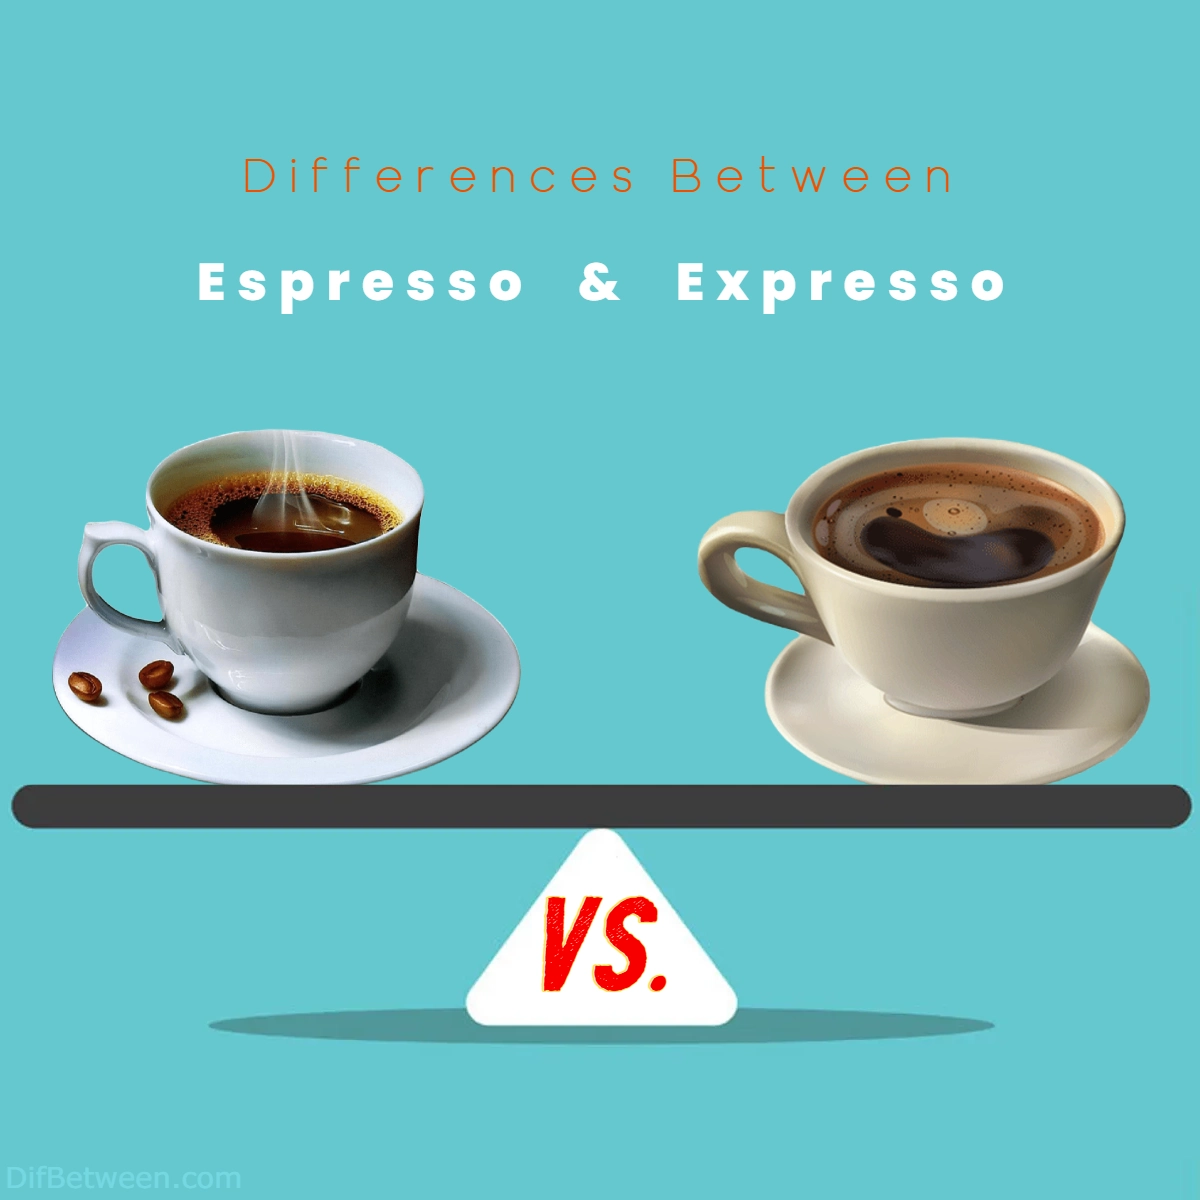 Difference Between Espresso and Expresso